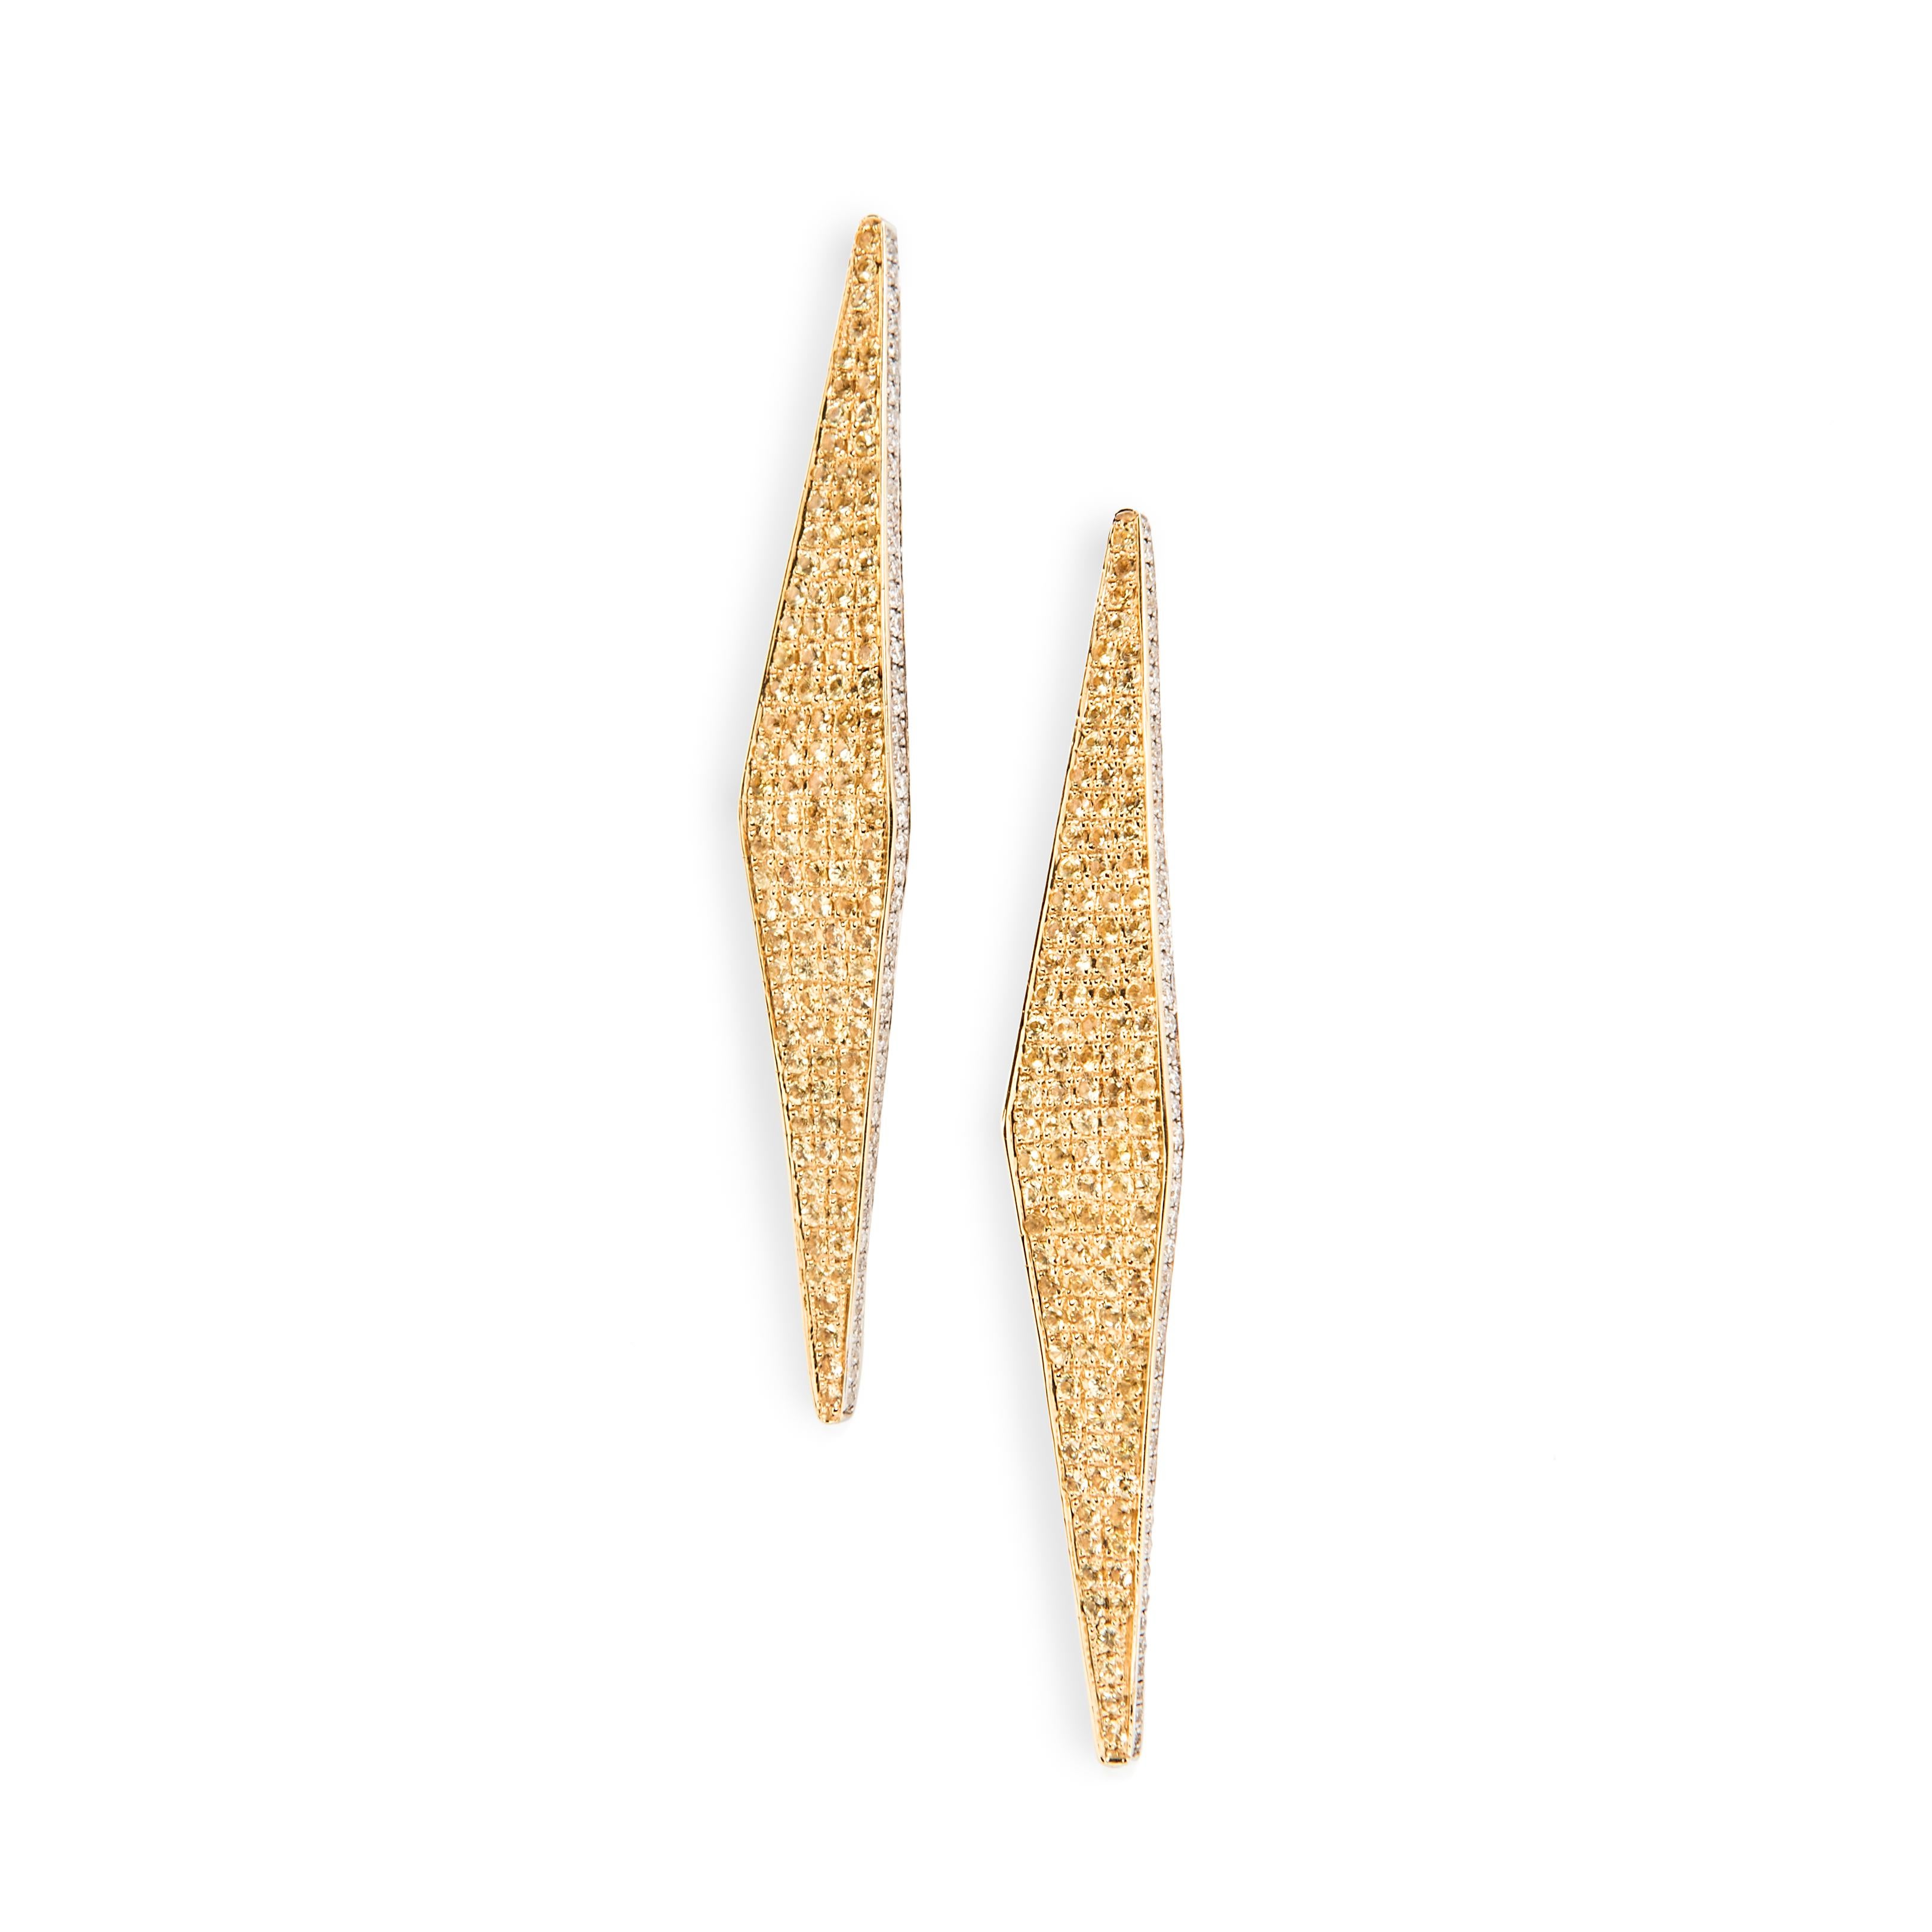 Contemporary Ralph Masri Modernist Pave Diamond and Yellow Sapphire Earrings For Sale